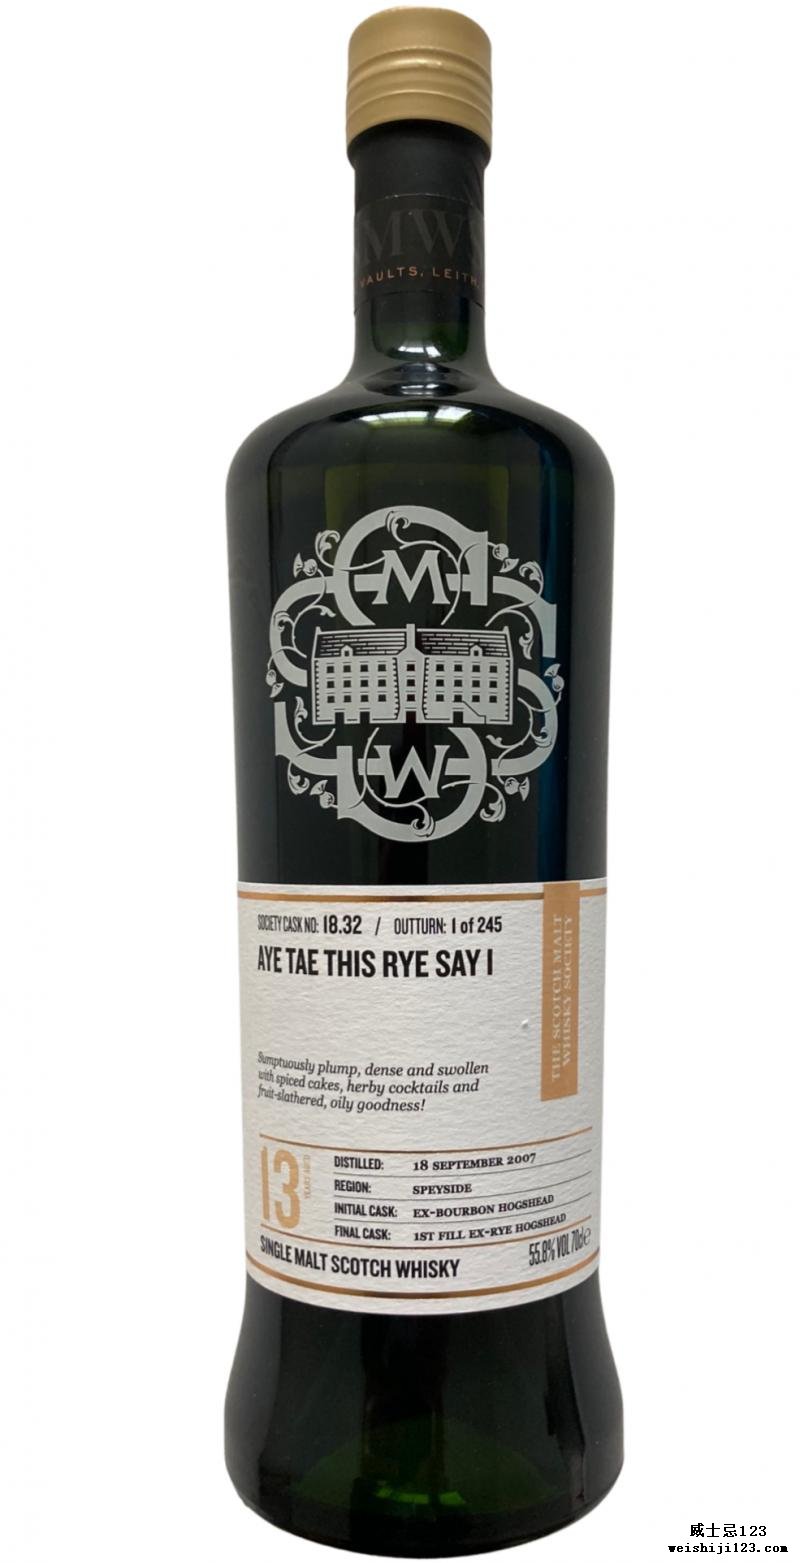 Inchgower 2007 SMWS 18.32